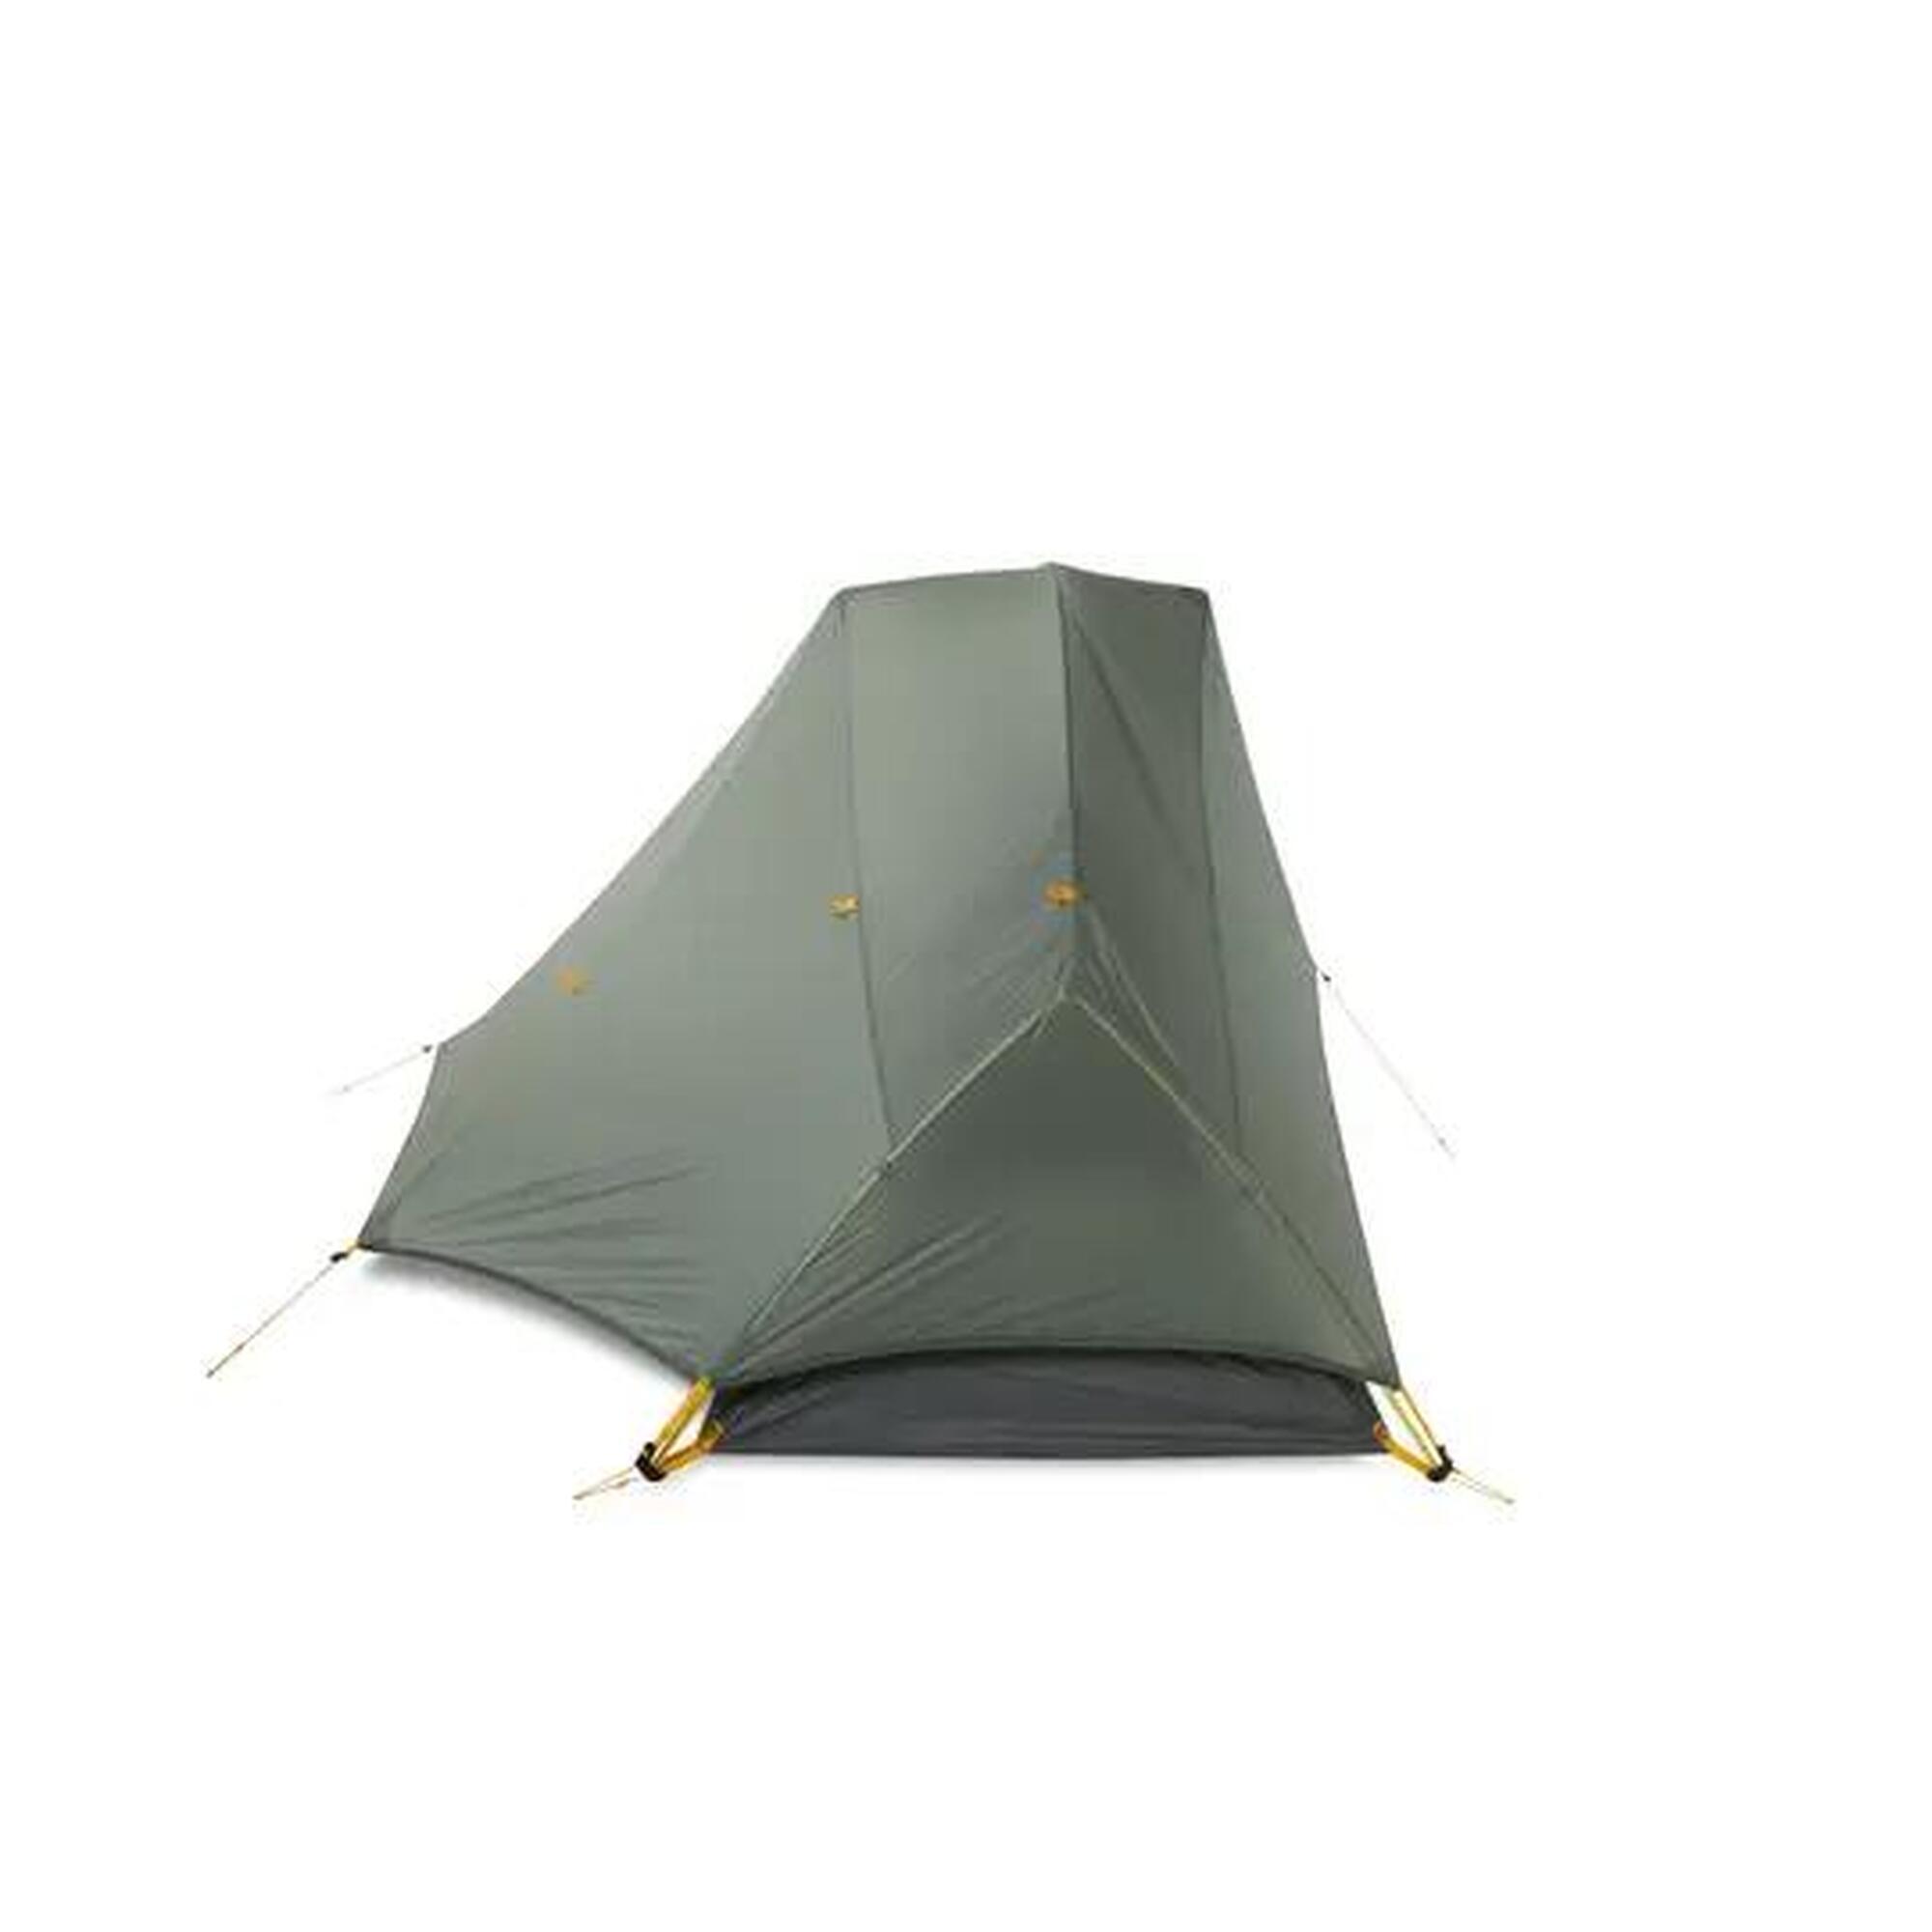 DRAGONFLY OSMO BIKEPACK 1P TENT / Grey